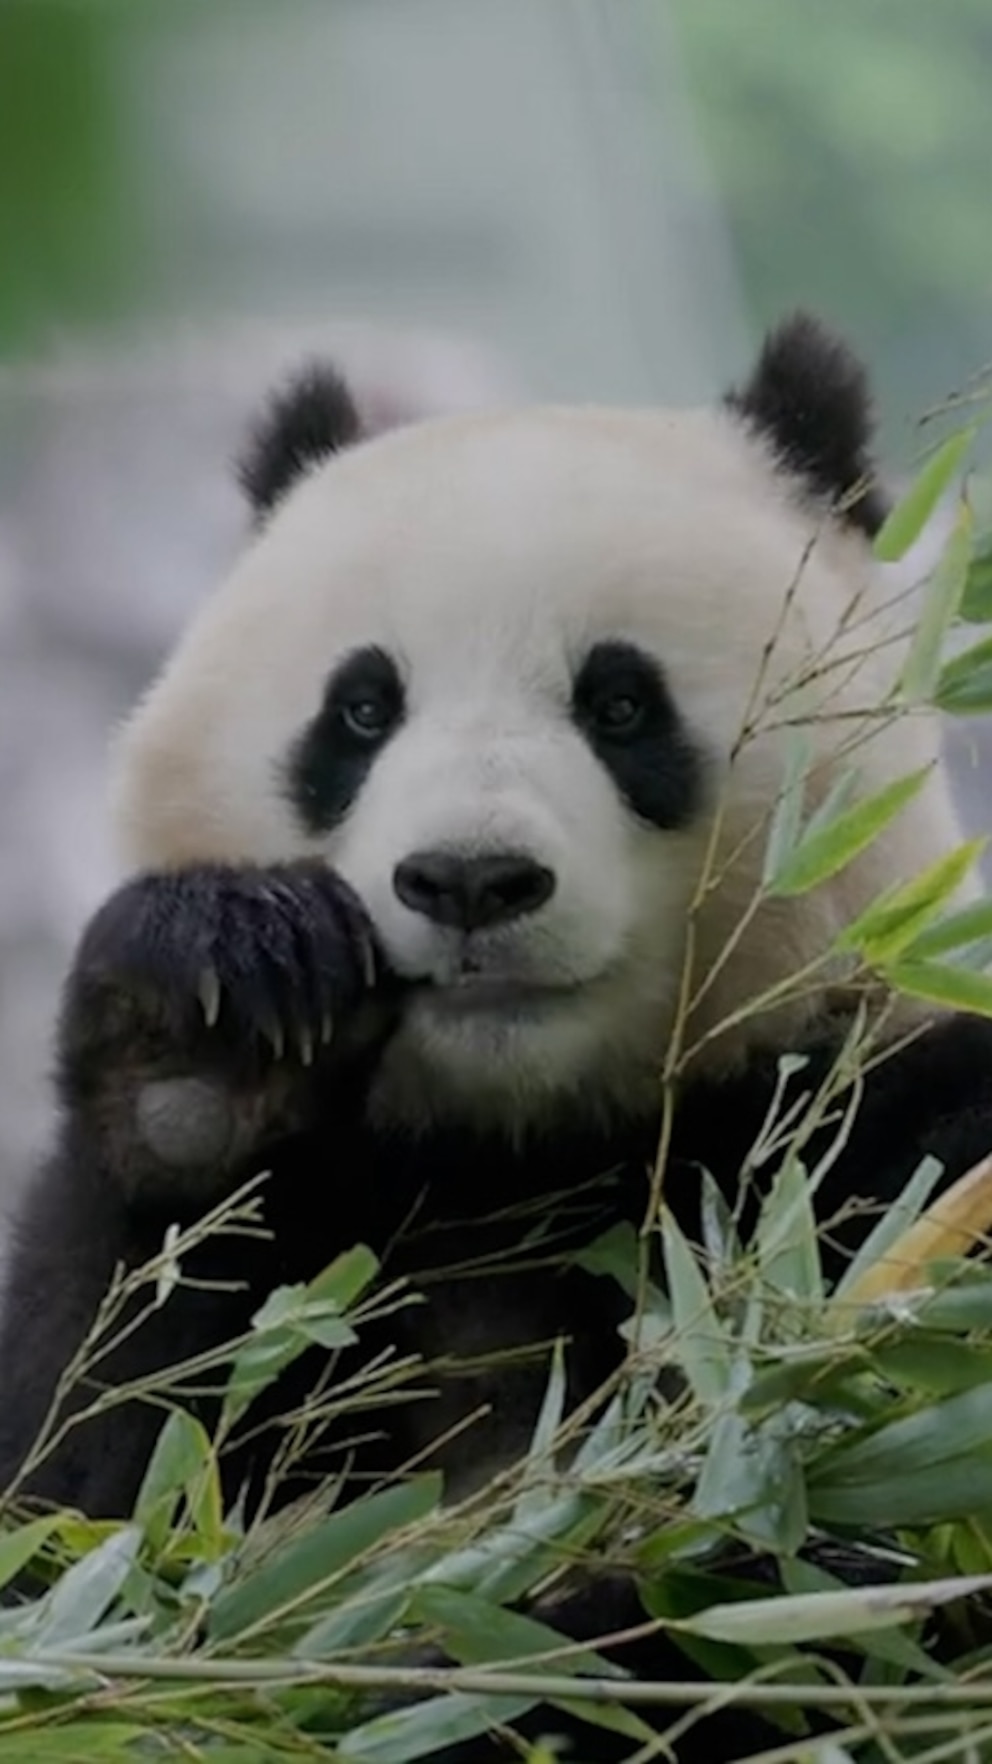 WATCH: Adorable new pandas arriving at the National Zoo from China